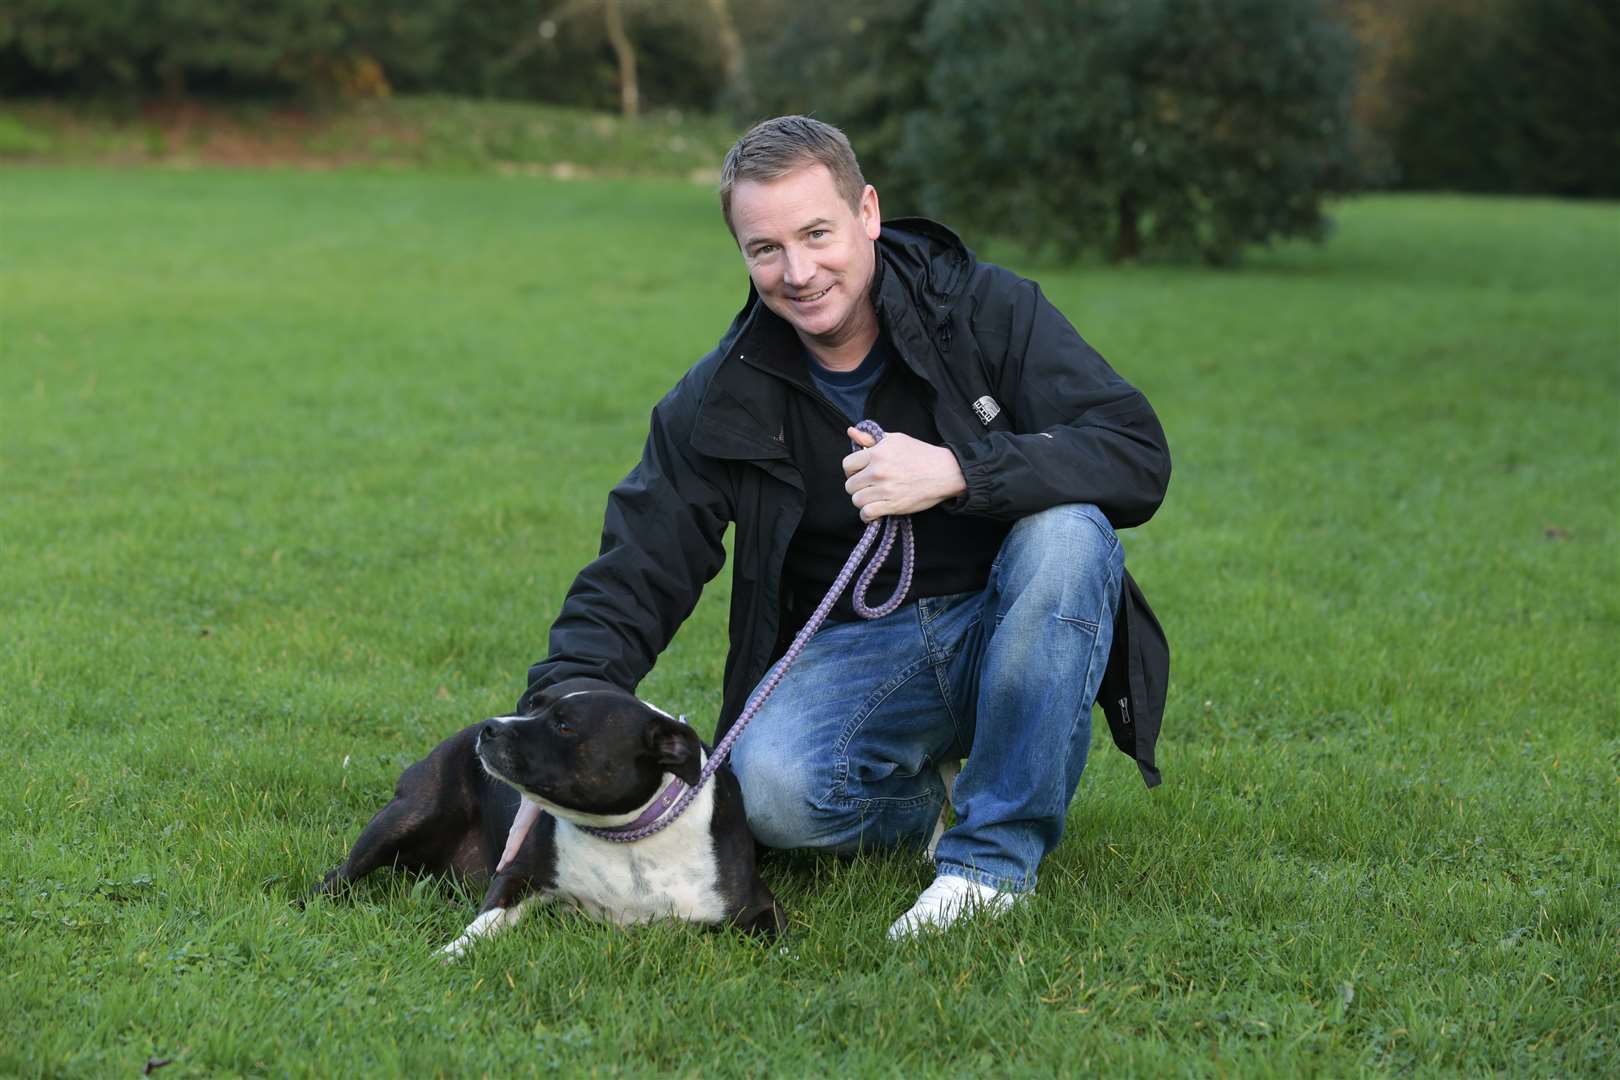 Richard Cummins, who fosters dogs for the RSPCA's Headcorn and Leybourne branches, walks Mollie the dog